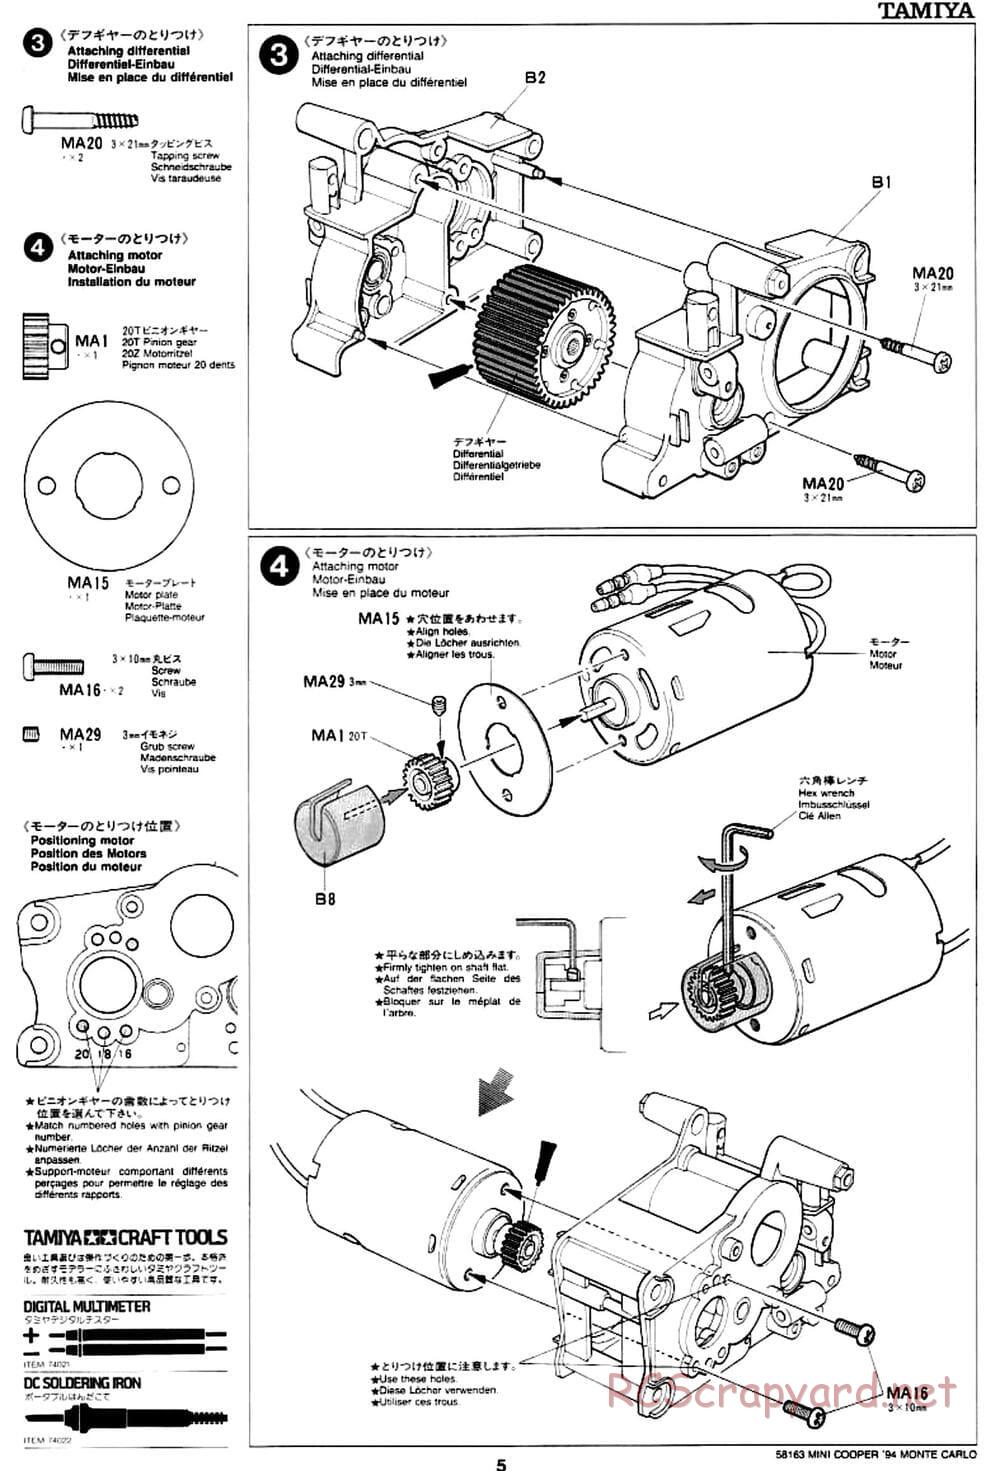 Tamiya - Rover Mini Cooper 94 Monte-Carlo - M01 Chassis - Manual - Page 5